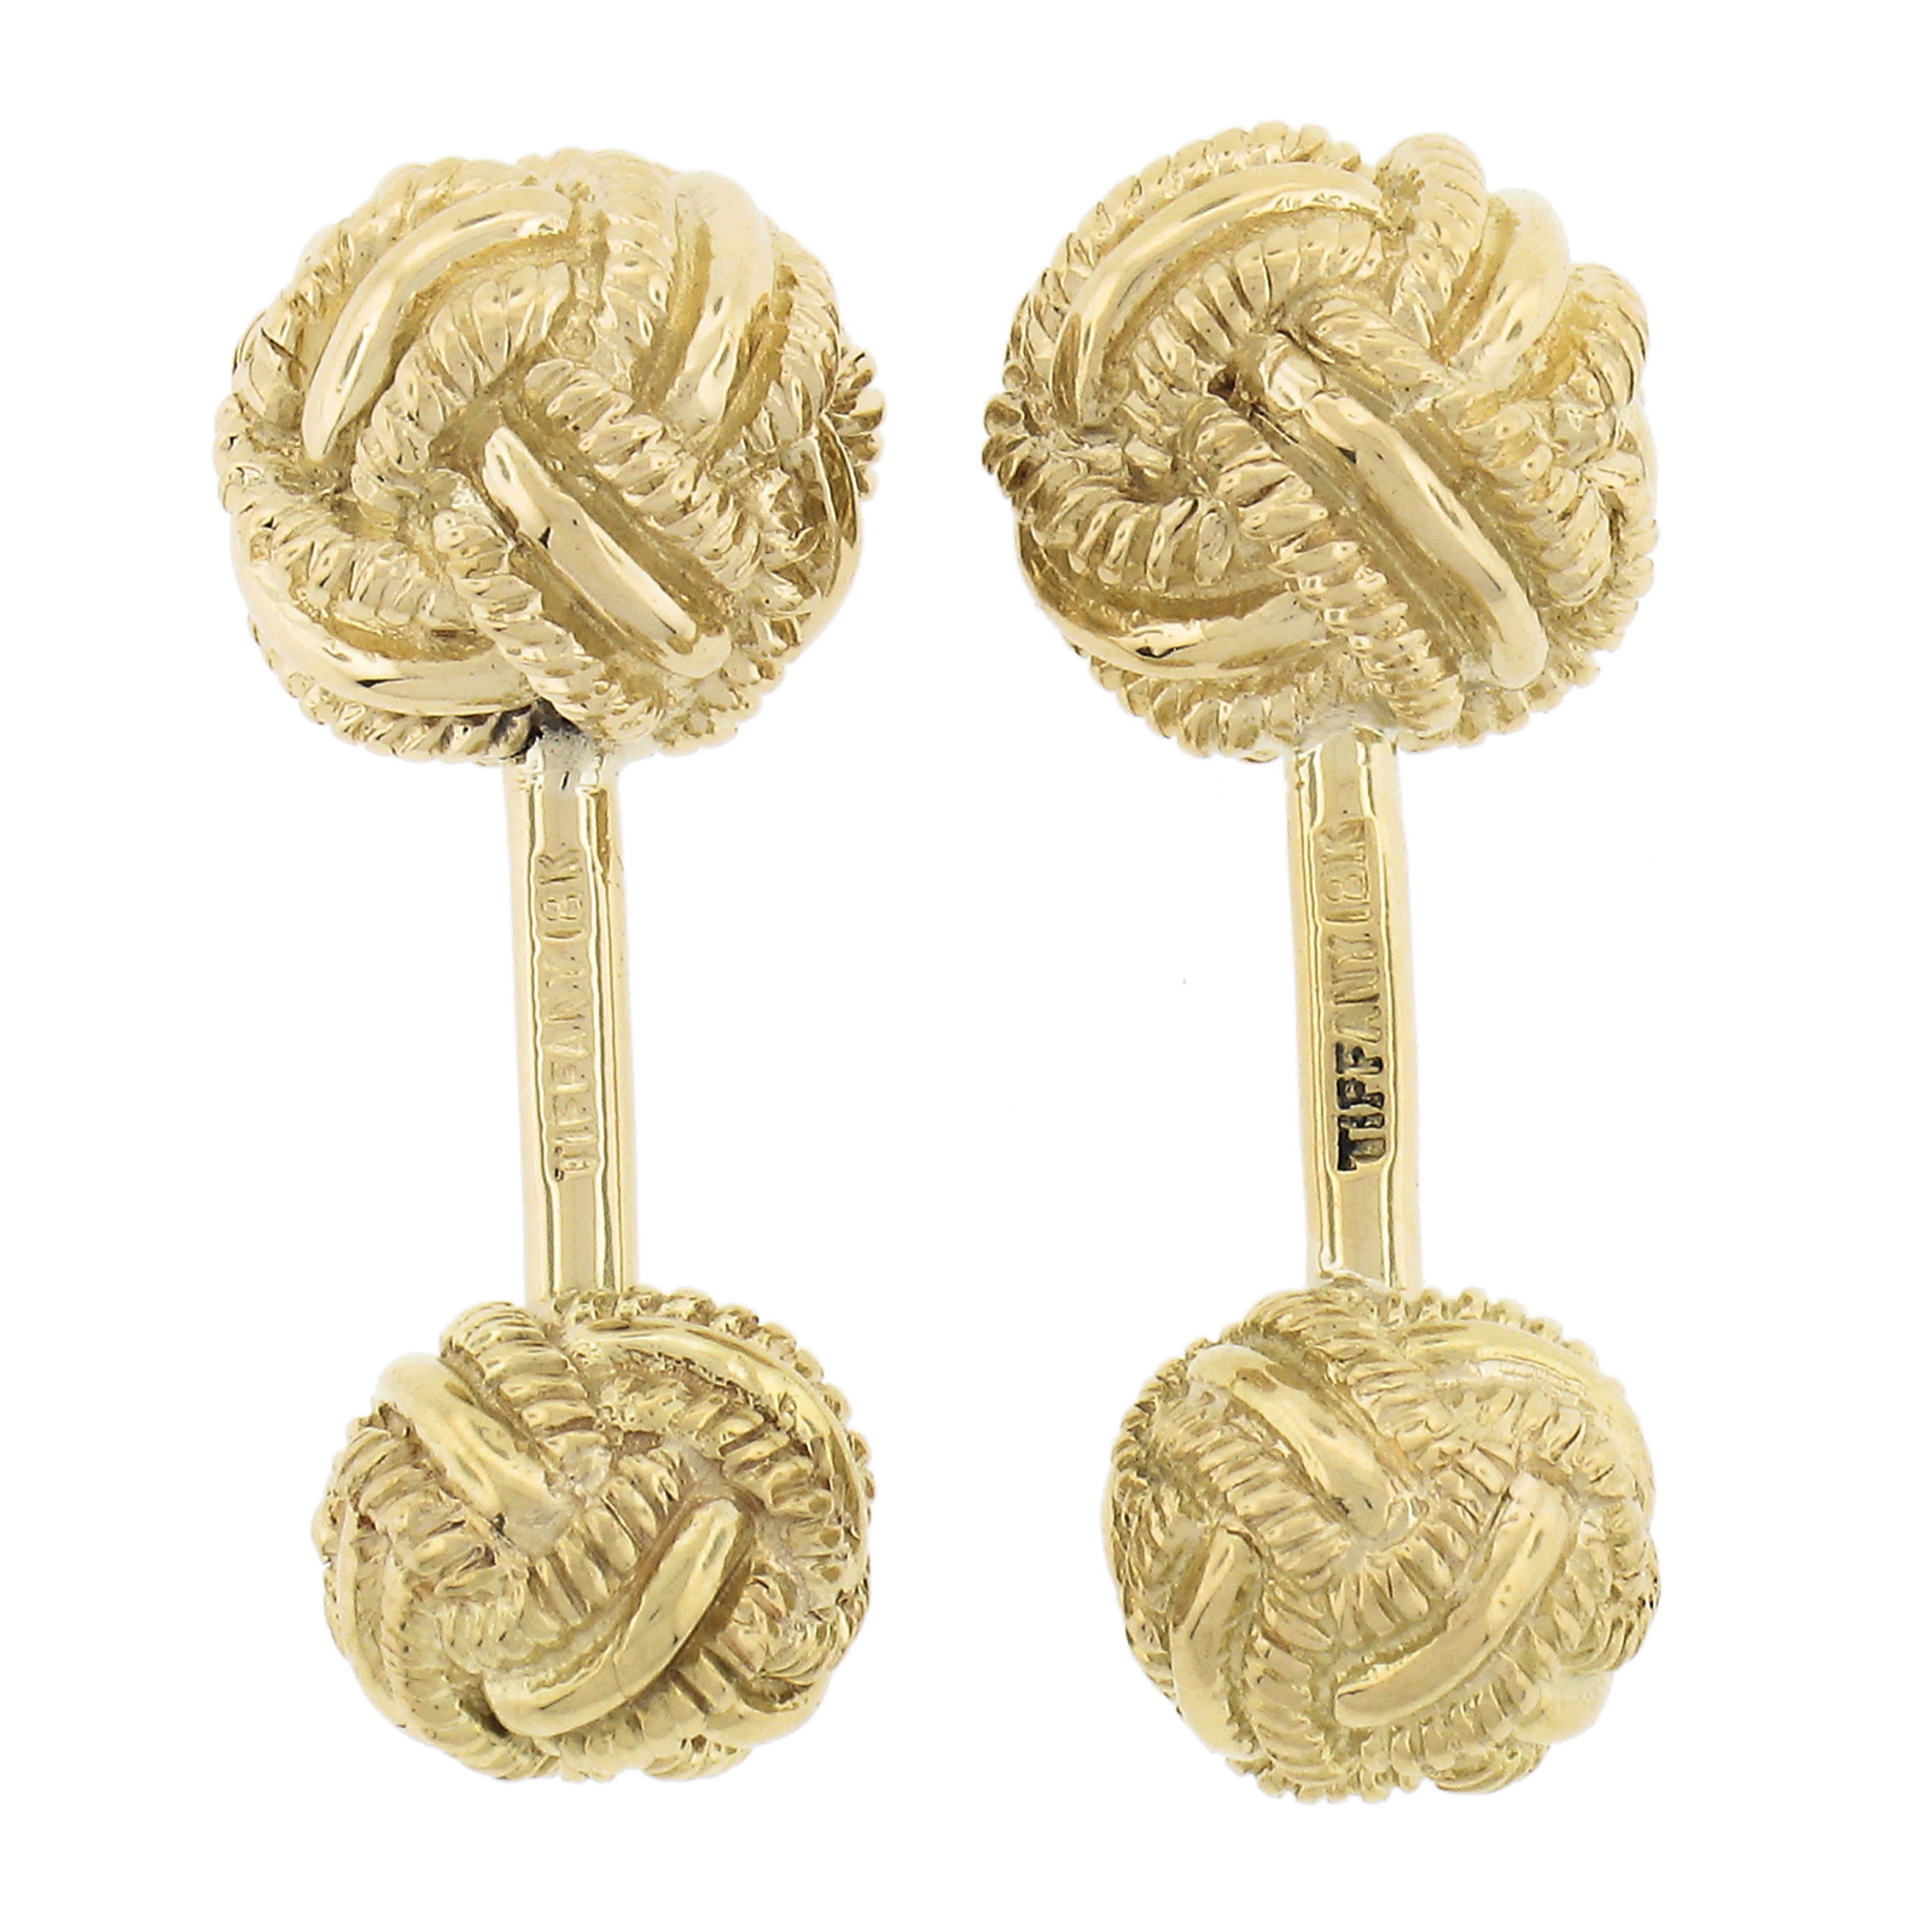 Tiffany & Co. Schlumberger Men's Solid 18k Yellow Gold Woven Knot Cufflinks In Excellent Condition For Sale In Montclair, NJ